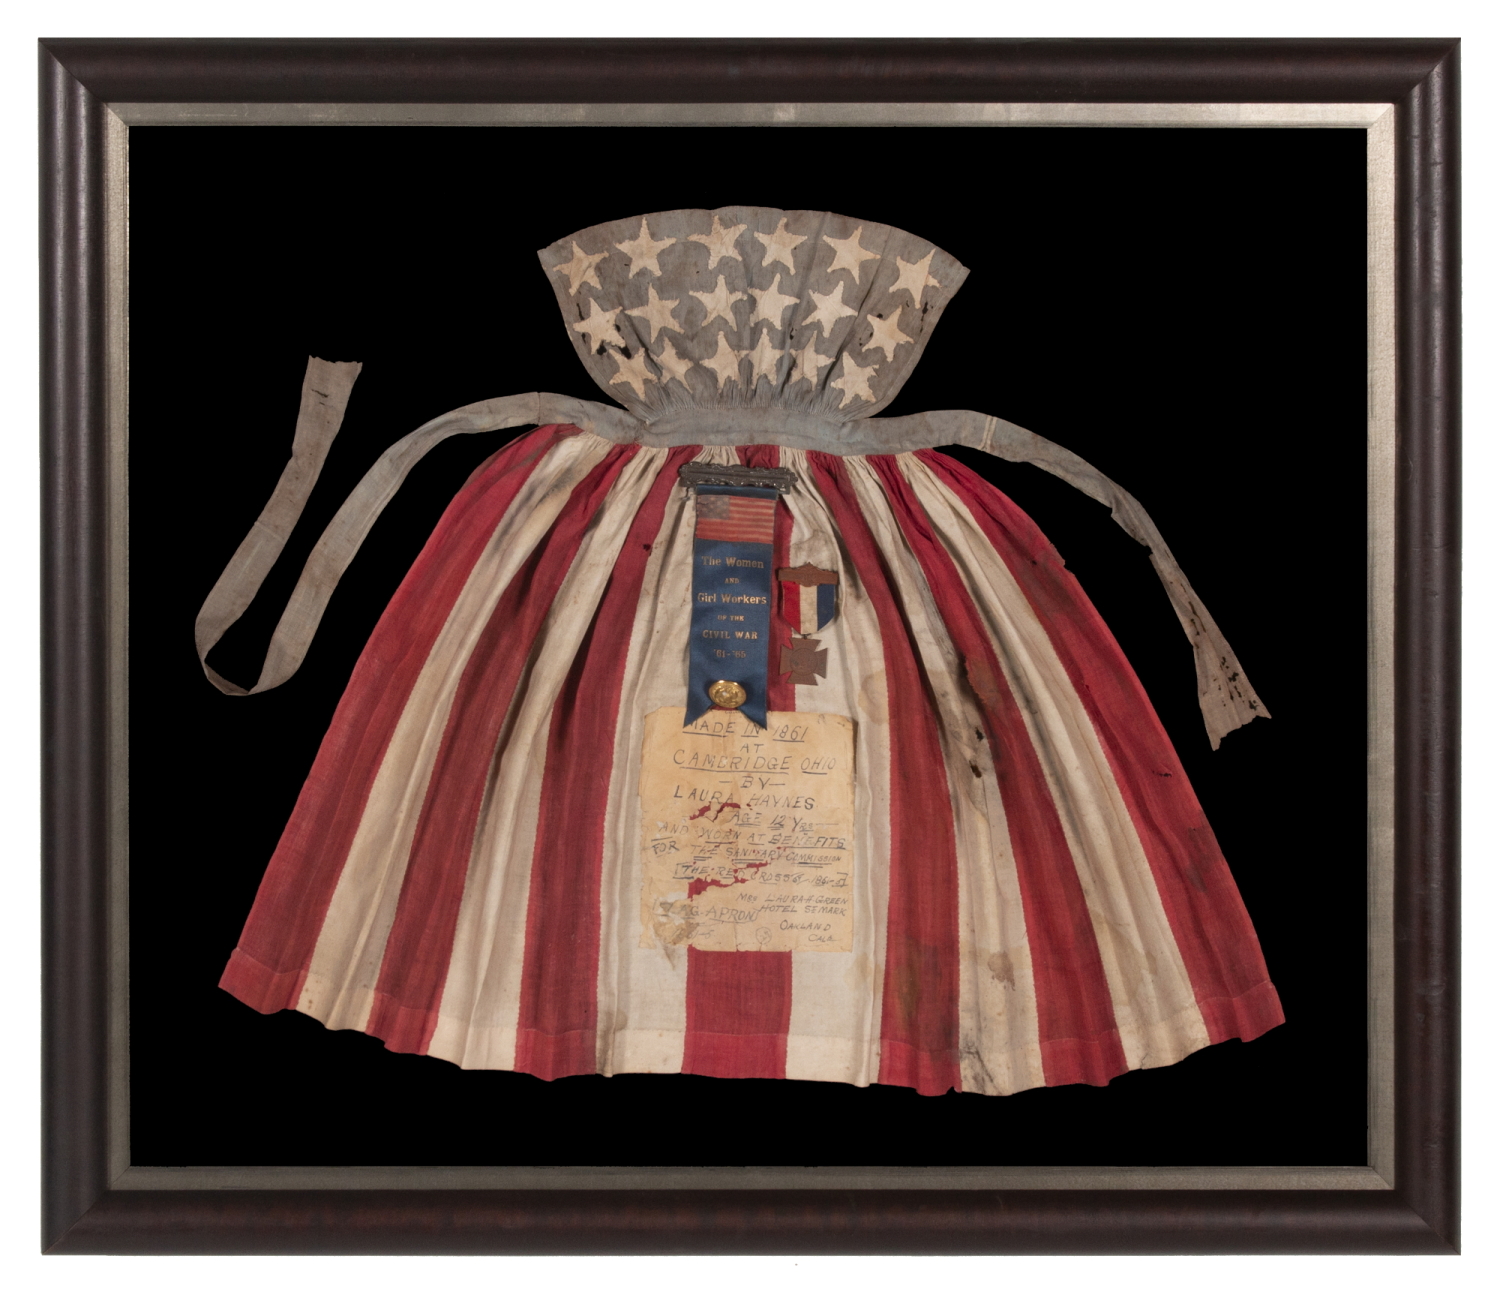 CIVIL WAR PERIOD APRON, MADE IN CAMBRIDGE, OHIO IN 1861 BY 12-YEAR-OLD LAURA HAYNES, WORN BY HER AT BENEFITS FOR THE U.S. SANITARY COMMISSION, PREDECESSOR OF THE RED CROSS, THAT STAFFED, FUNDED, AND MODERNIZED CIVIL WAR HOSPITALS